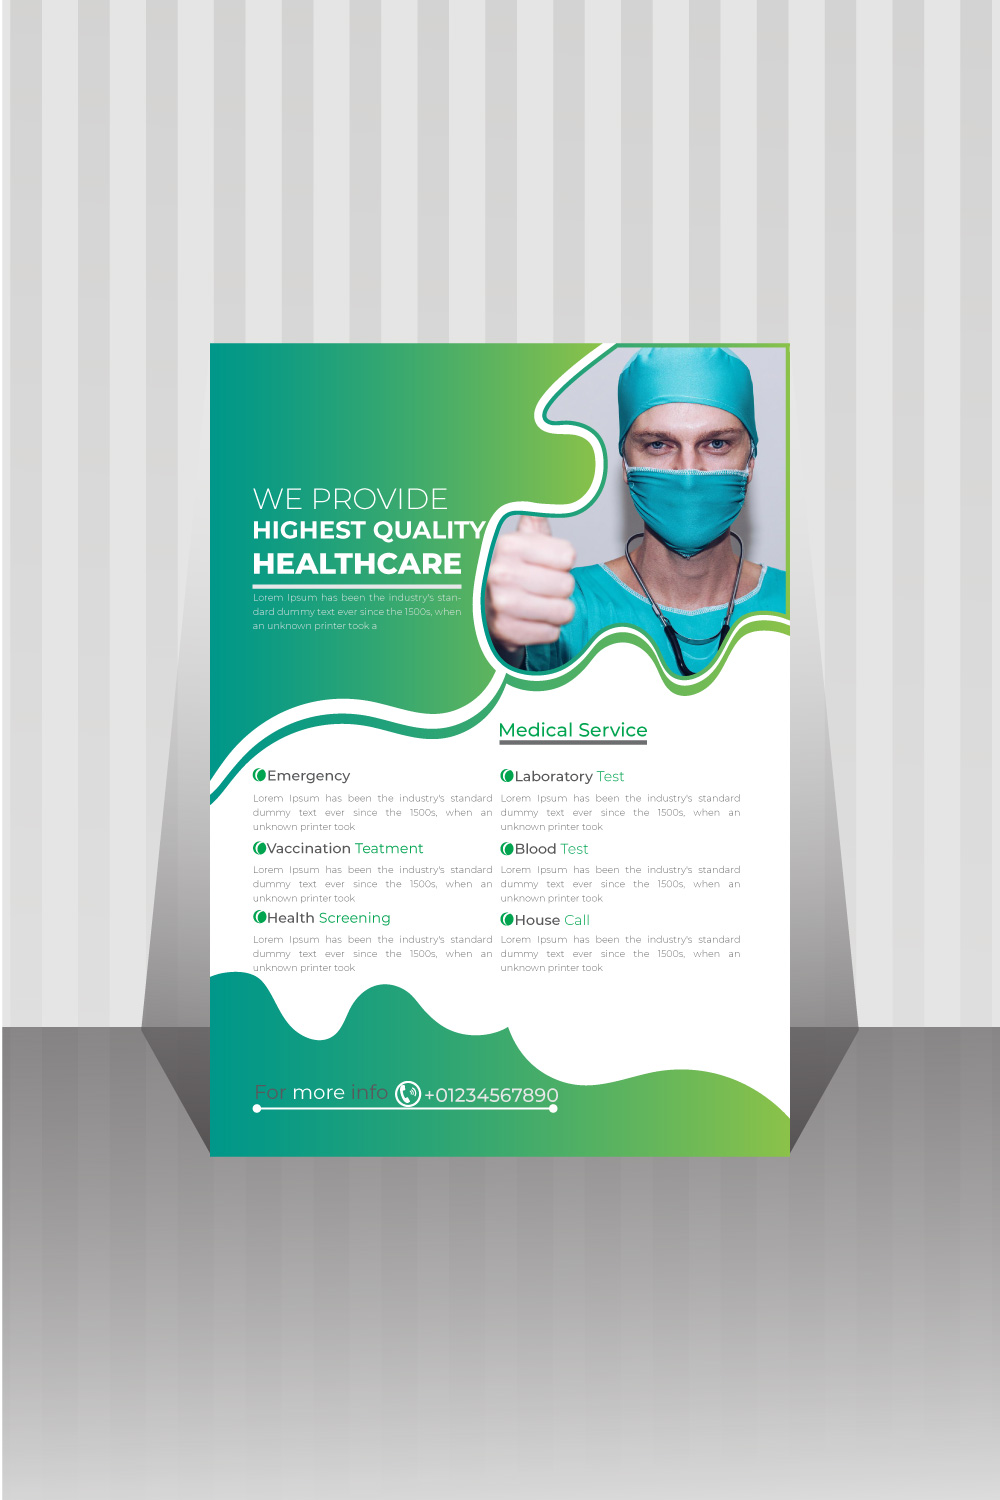 Medical flyer image with exquisite design